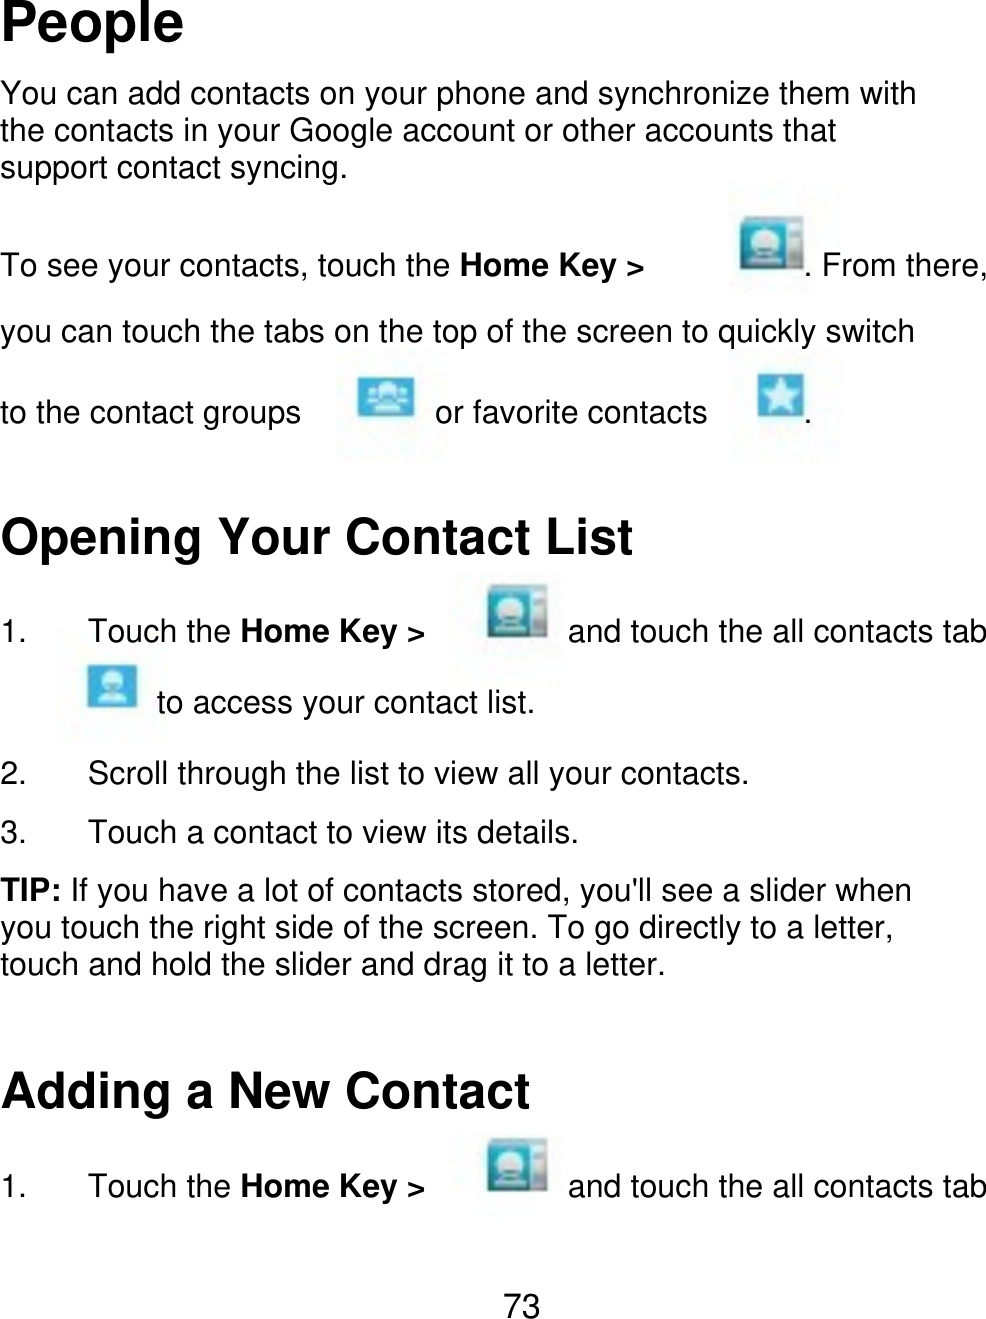 People You can add contacts on your phone and synchronize them with the contacts in your Google account or other accounts that support contact syncing. To see your contacts, touch the Home Key &gt; . From there, you can touch the tabs on the top of the screen to quickly switch to the contact groups or favorite contacts . Opening Your Contact List 1. Touch the Home Key &gt; and touch the all contacts tab to access your contact list. 2. 3. Scroll through the list to view all your contacts. Touch a contact to view its details. TIP: If you have a lot of contacts stored, you&apos;ll see a slider when you touch the right side of the screen. To go directly to a letter, touch and hold the slider and drag it to a letter. Adding a New Contact 1. Touch the Home Key &gt; and touch the all contacts tab 73 